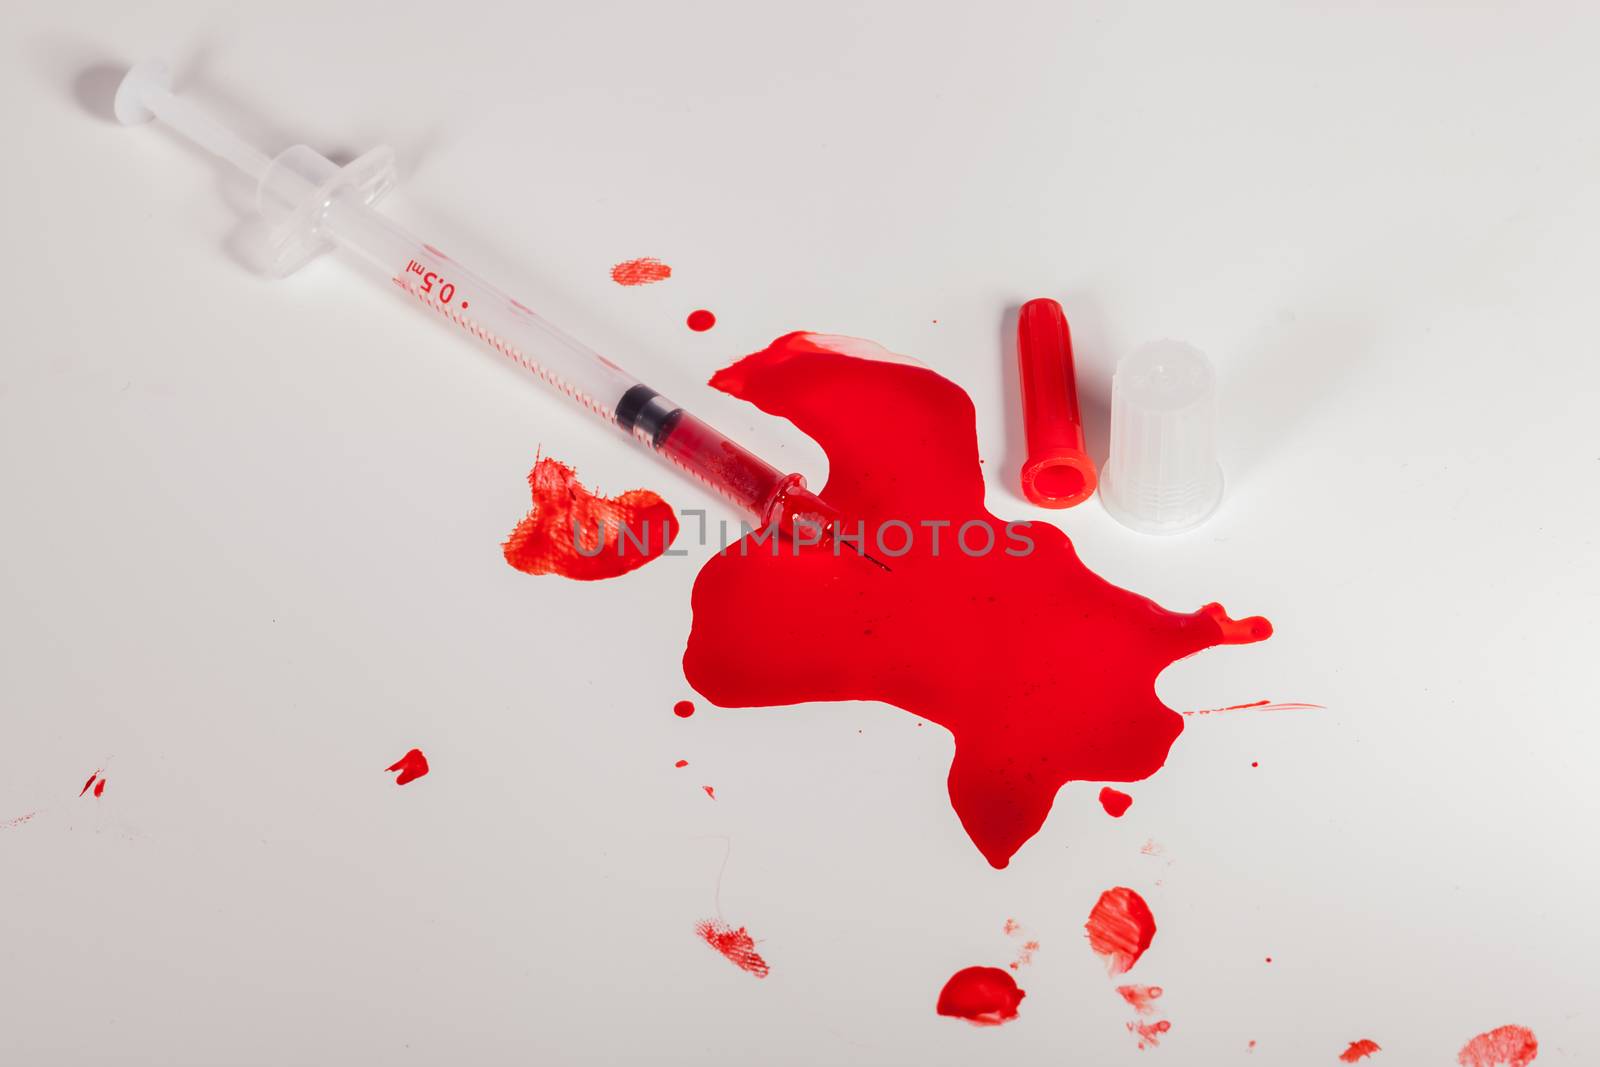 High Angle View of Syringe Needle Squirting Red Liquid or Blood onto White Background in Studio Still Life - Concept Image